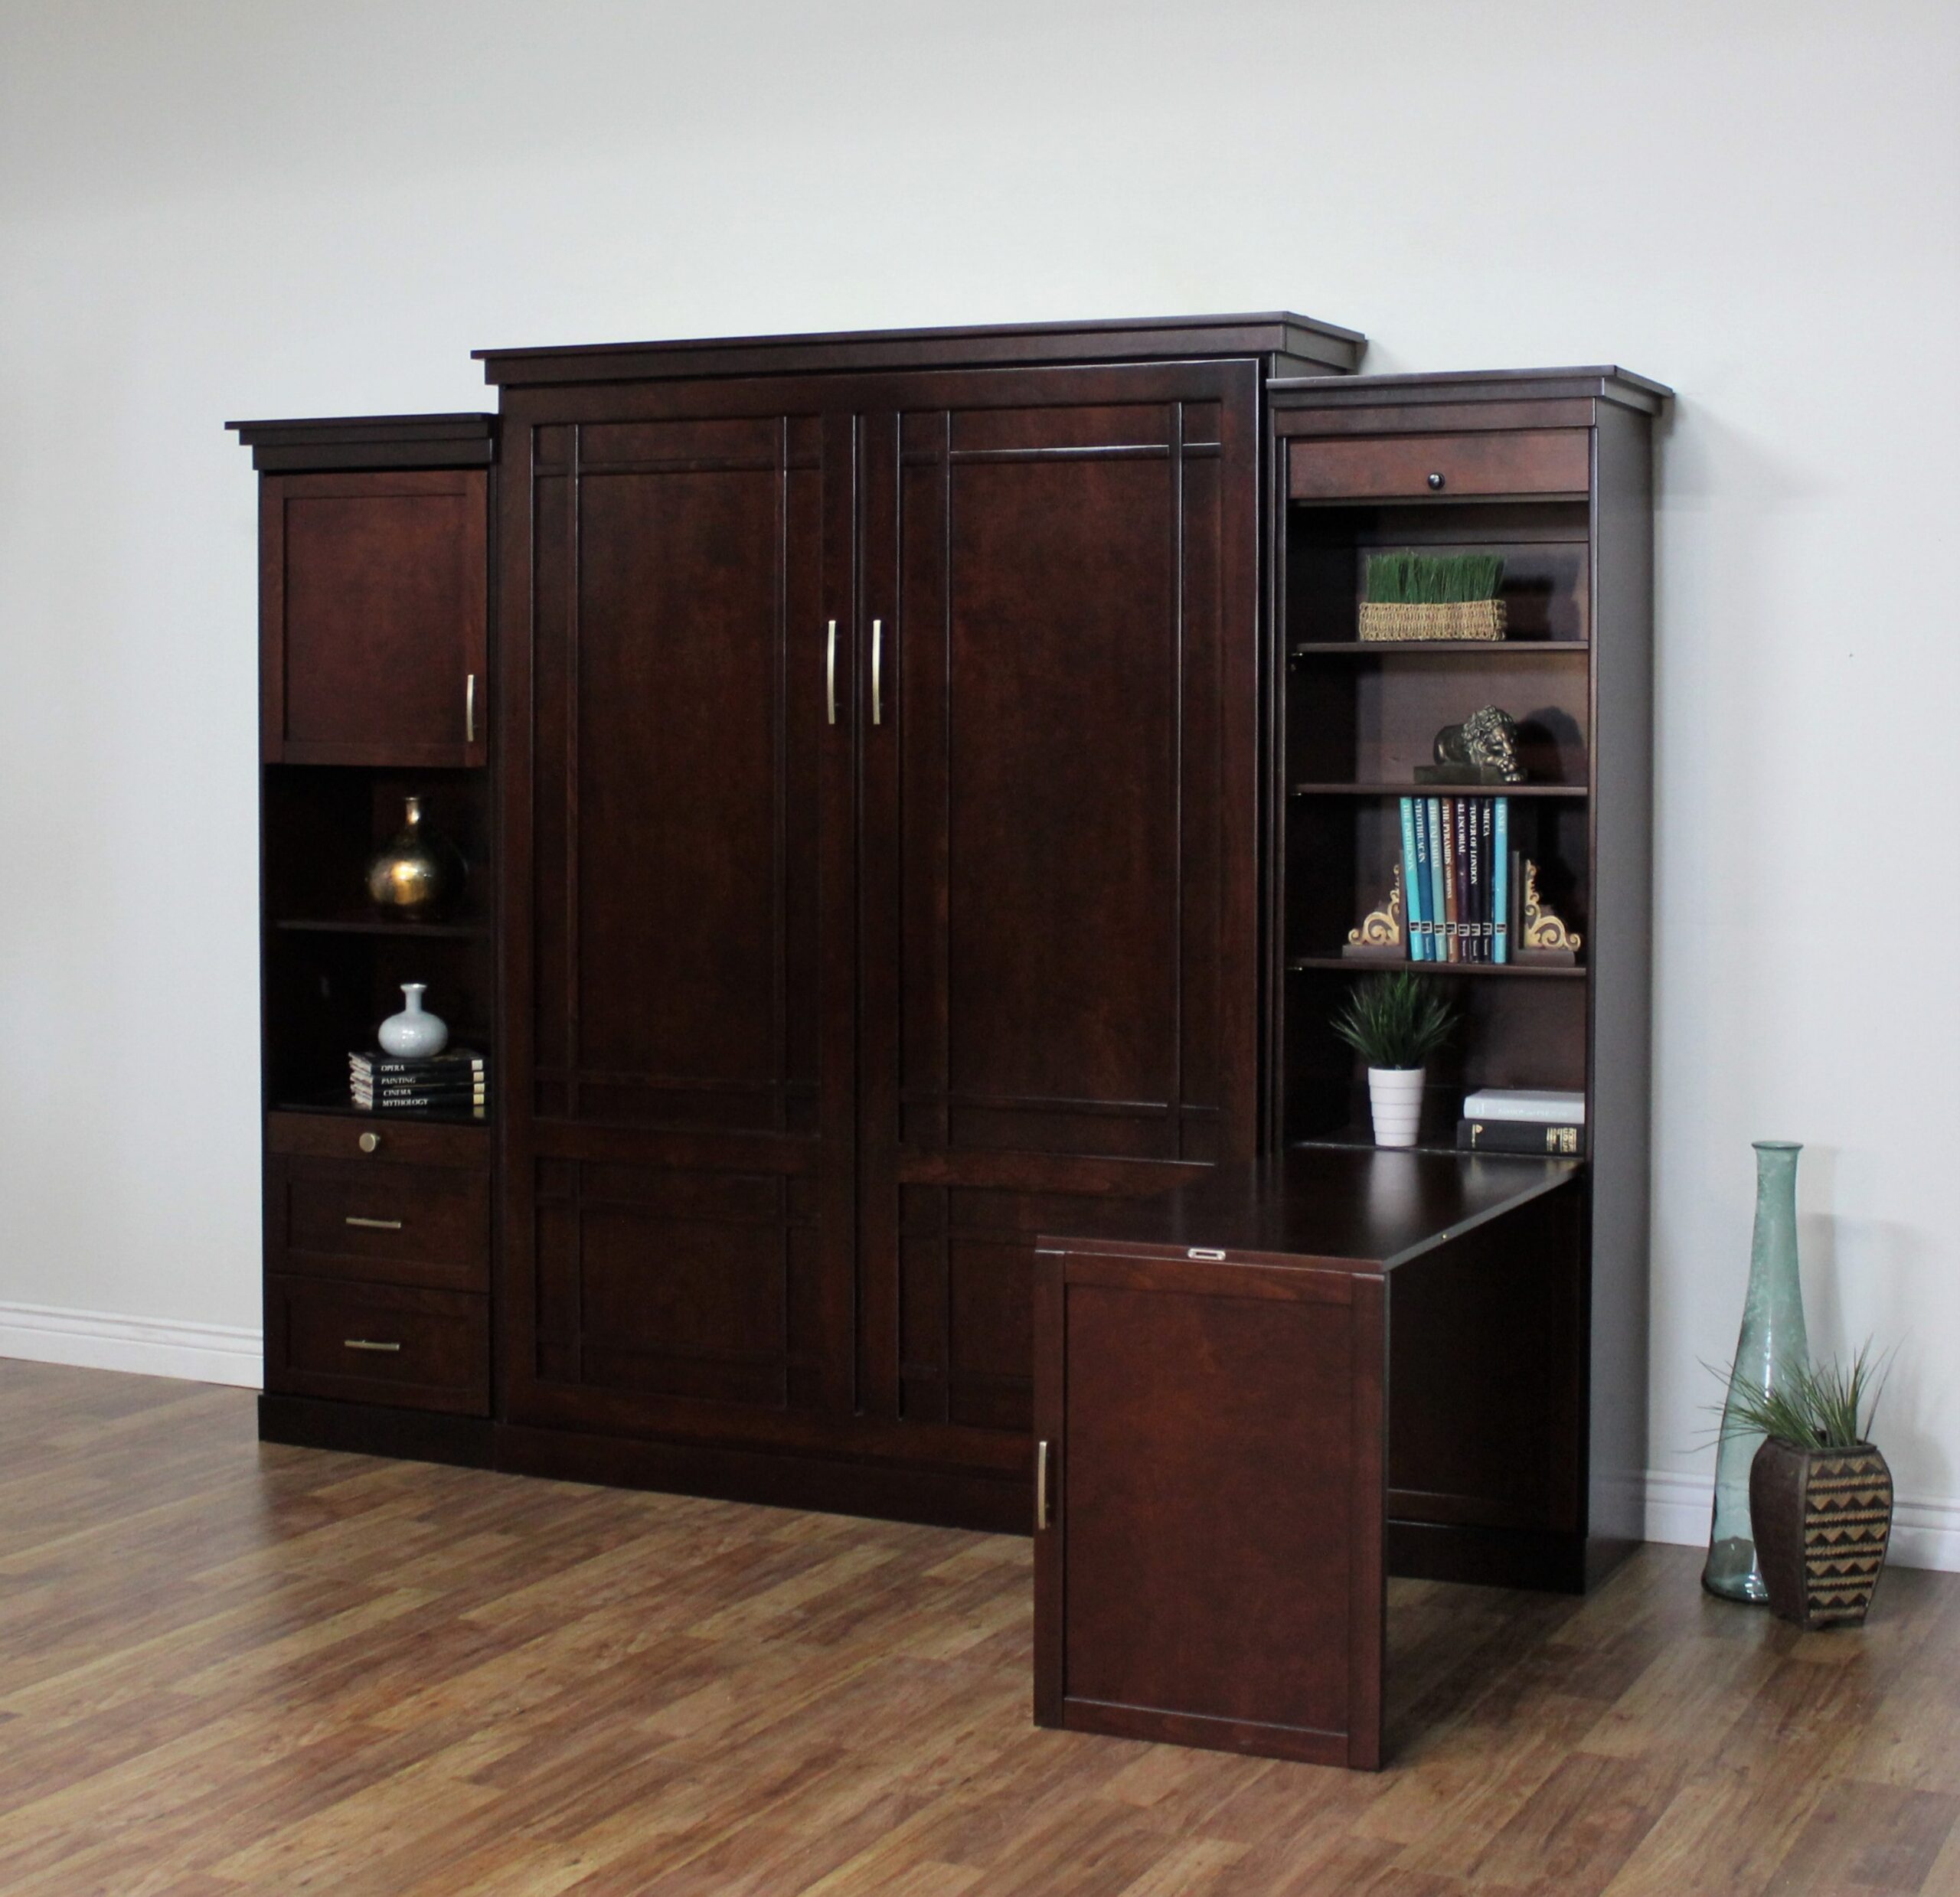 Murphy Beds with Cabinets Make Storage a Breeze!